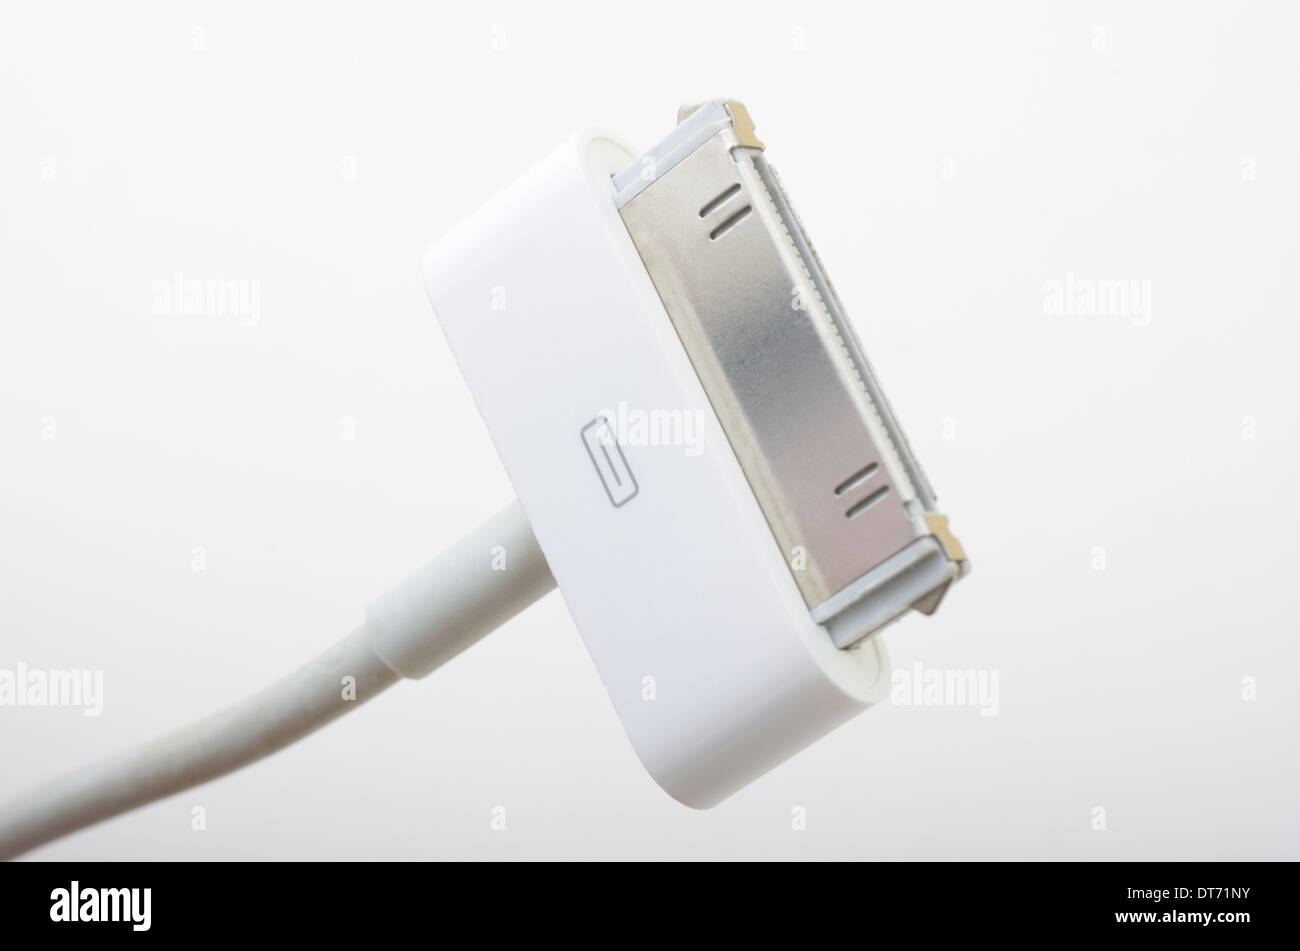 Cables recharger Lightning to USB Cable, 30-pin to USB, Micro USB and a  wireless charger Stock Photo - Alamy